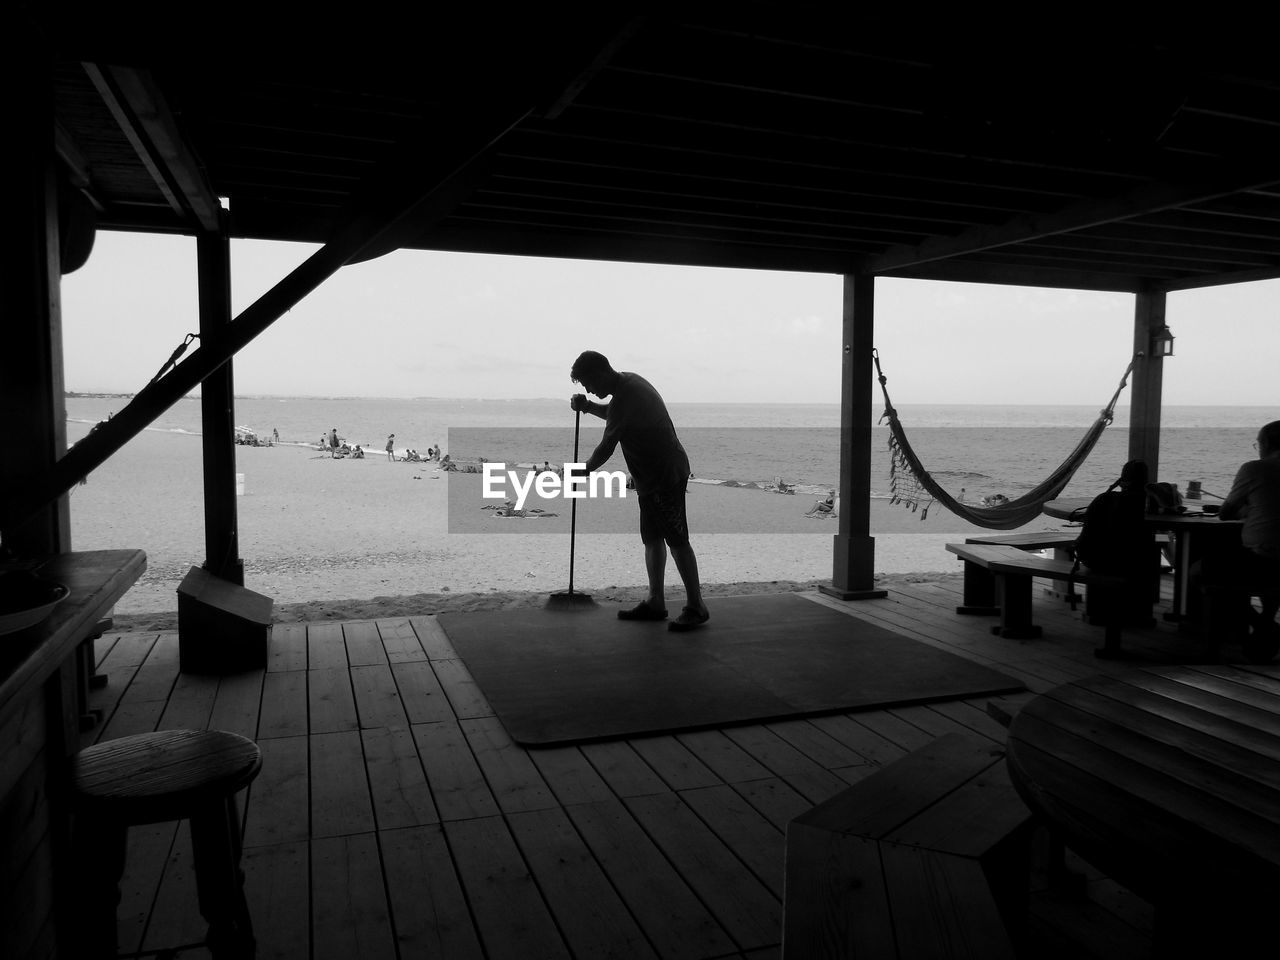 Man cleaning cafe at beach